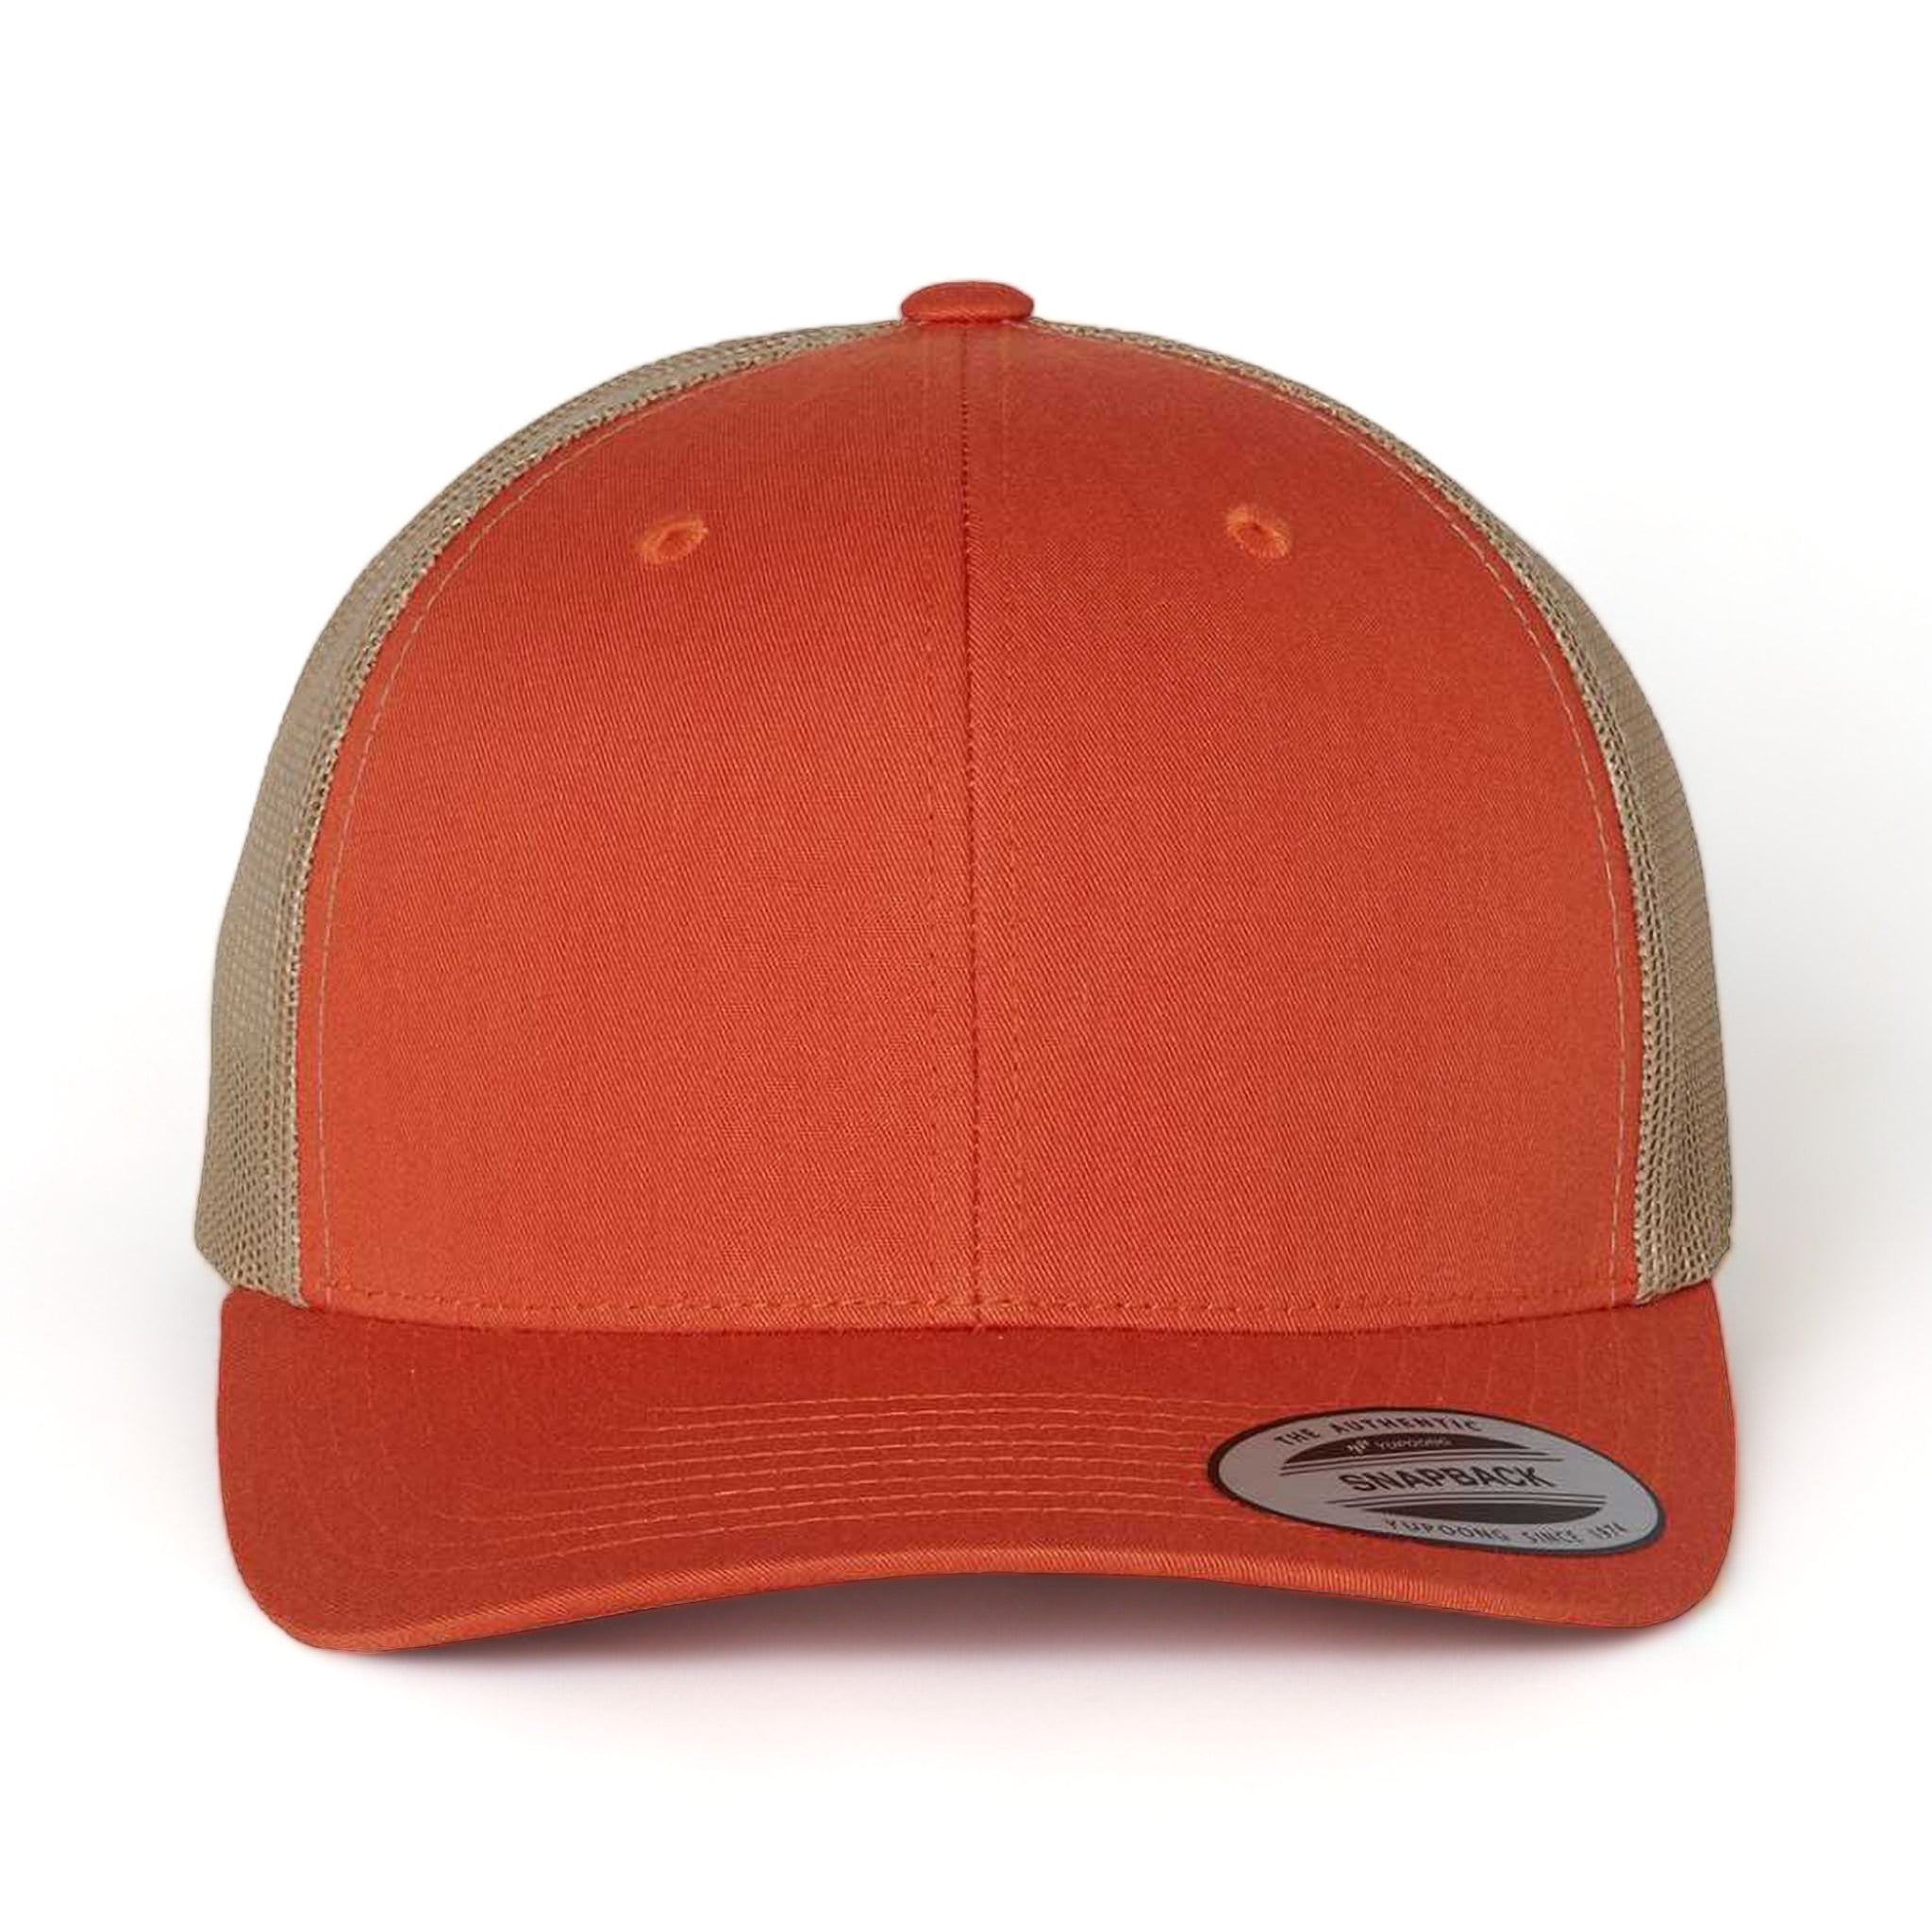 Front view of YP Classics 6606 custom hat in rustic orange and khaki